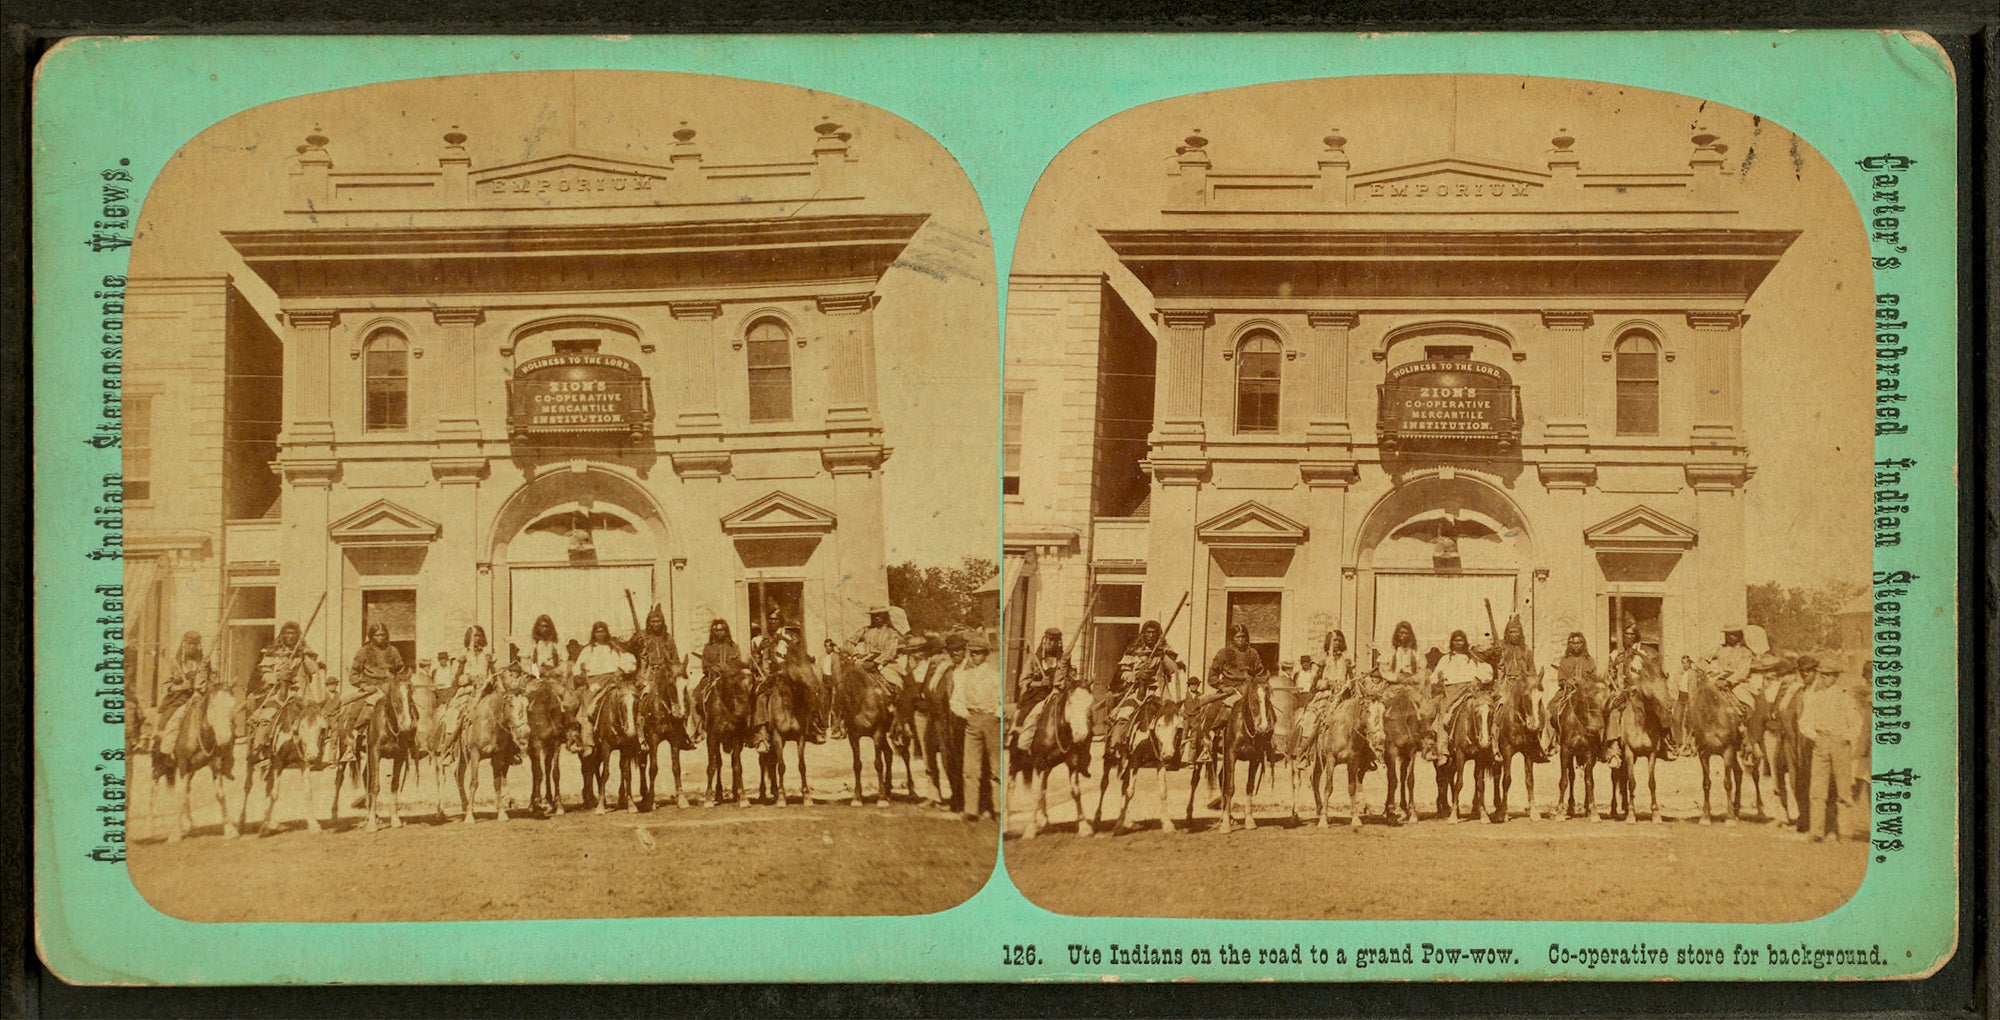 Sepia-toned stereograph showing a group of people on horseback in front of a storefront.